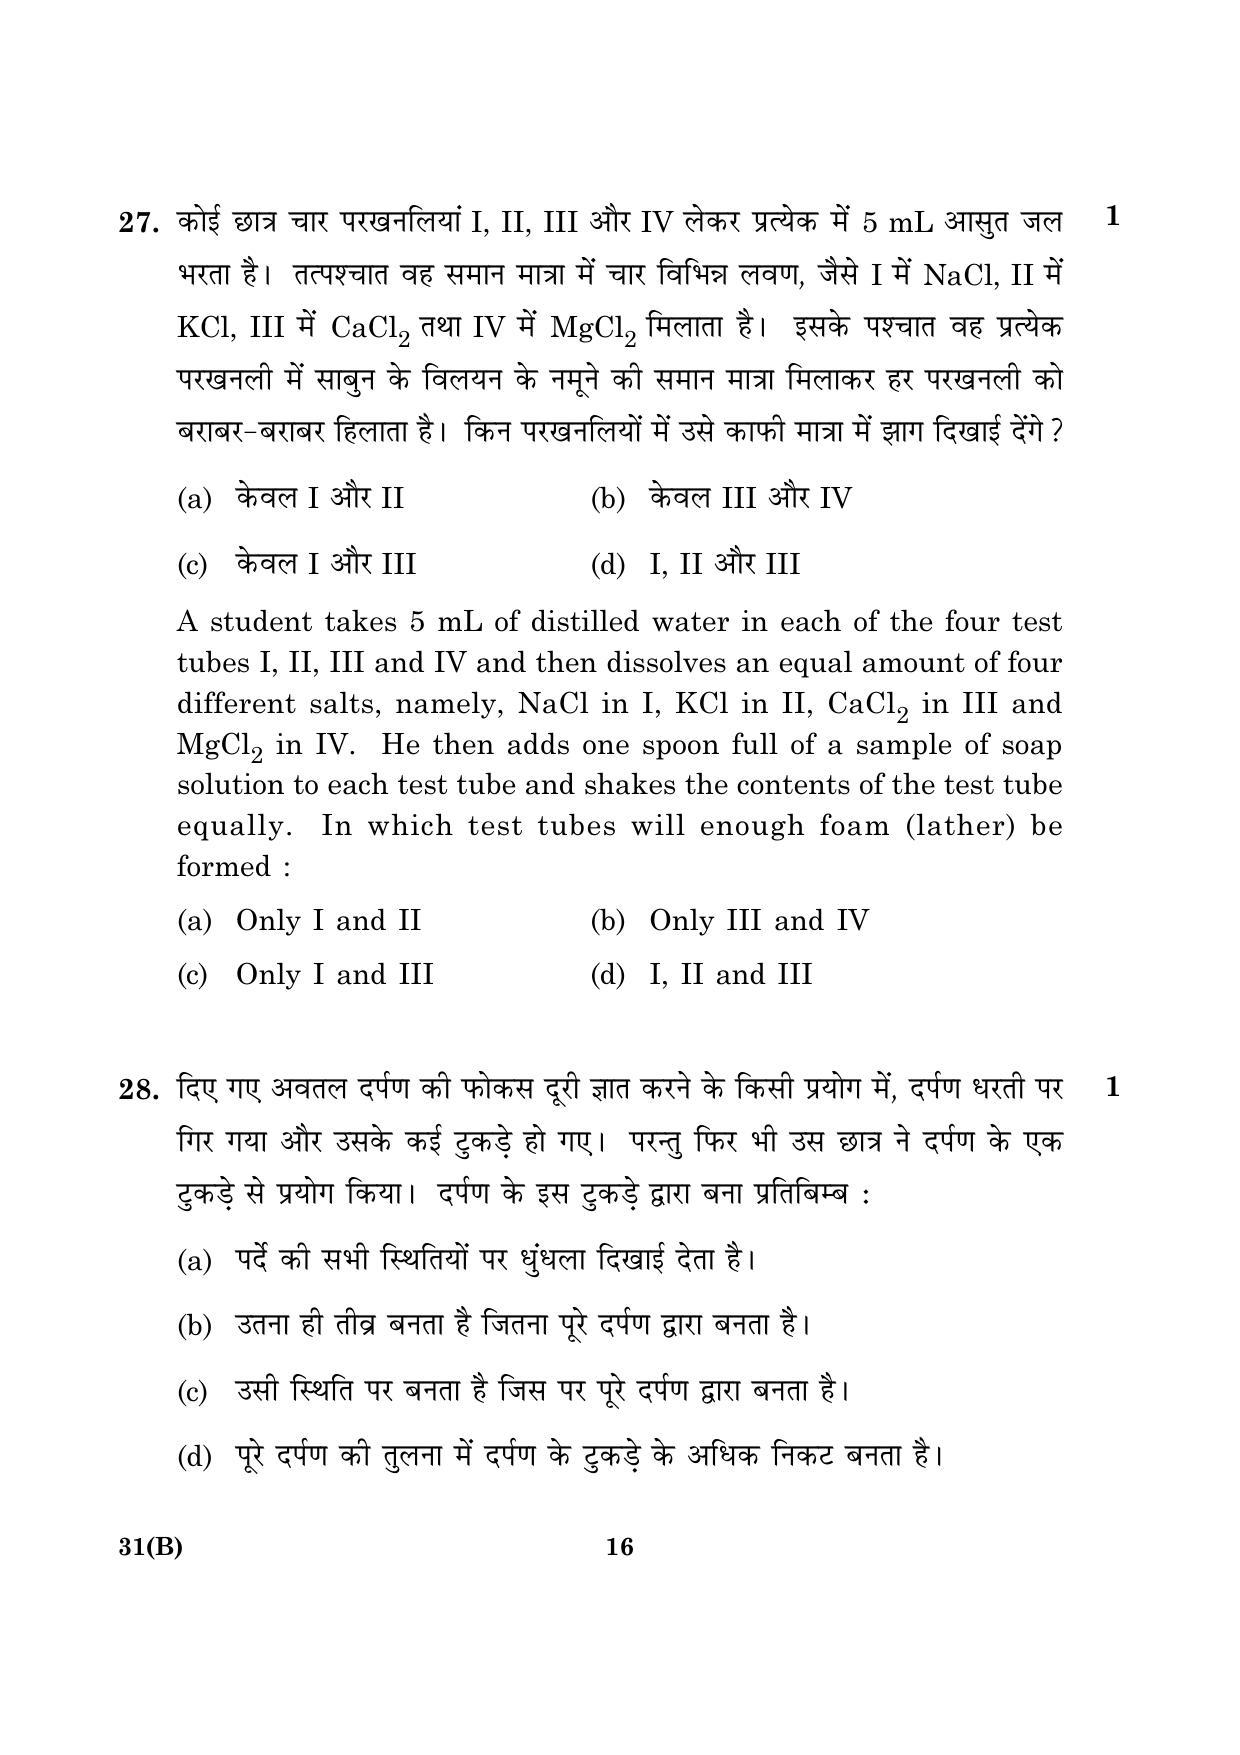 CBSE Class 10 031(B) Science 2016 Question Paper - Page 16